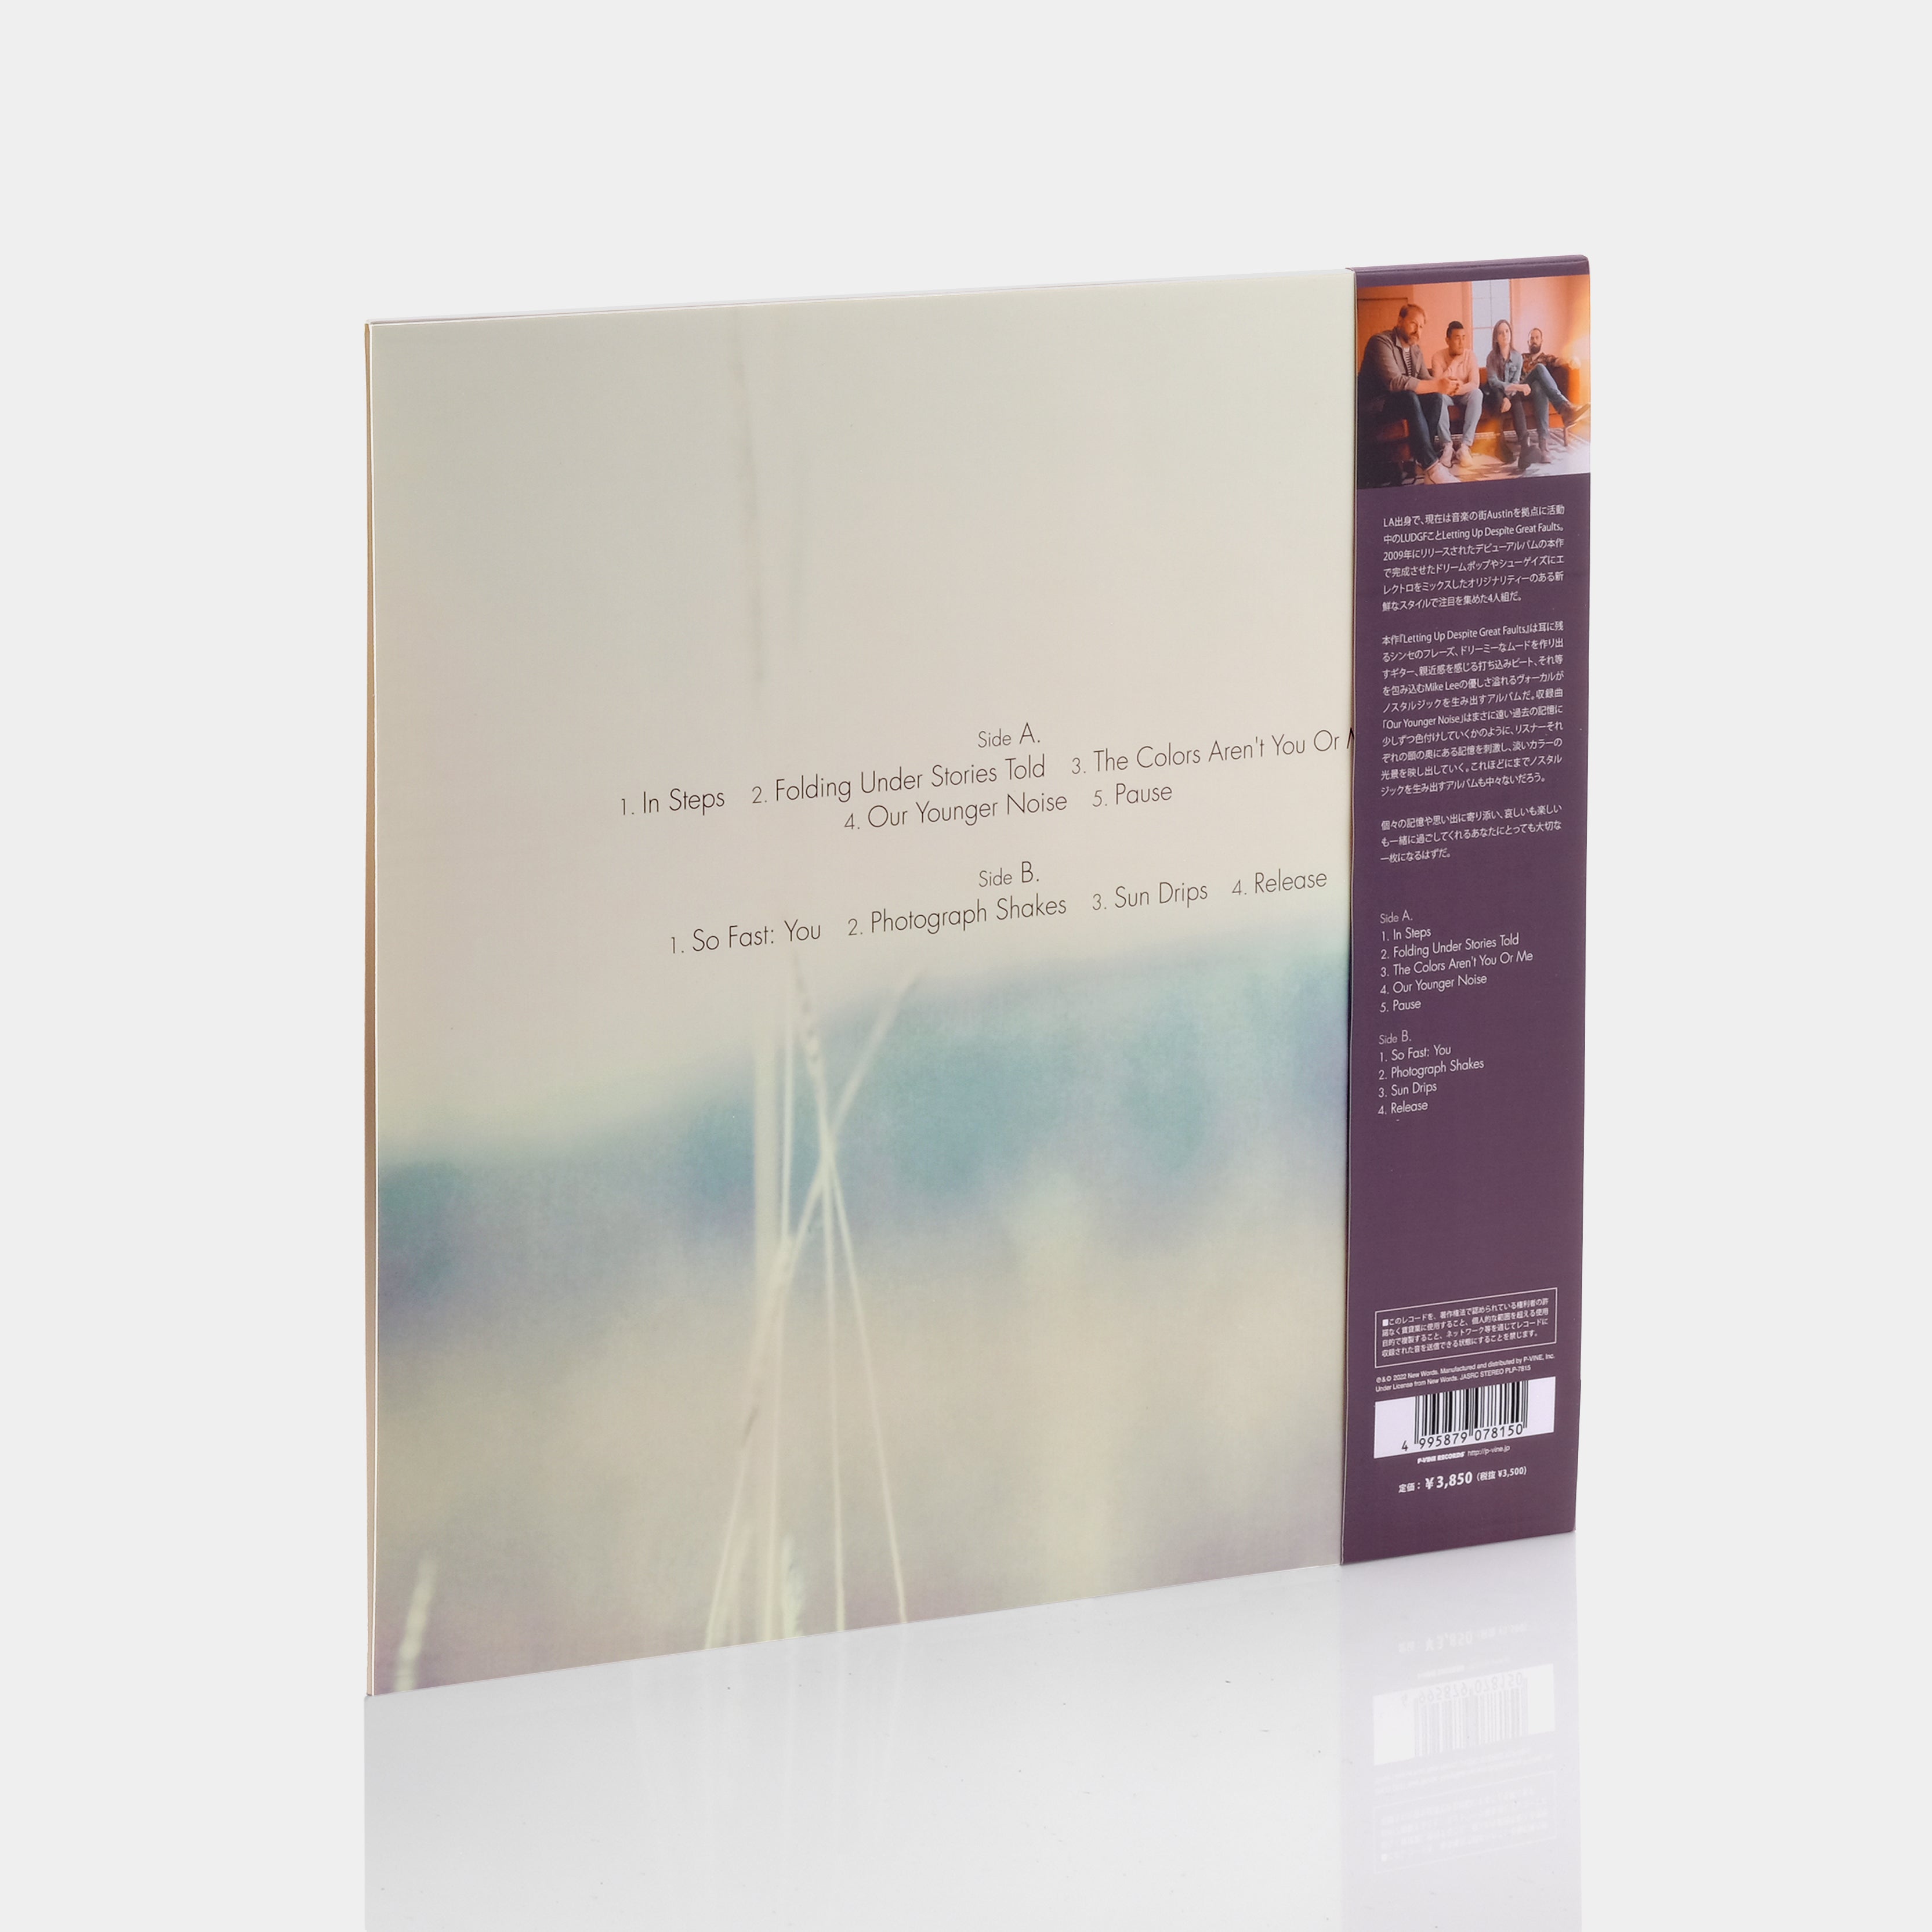 Letting Up Despite Great Faults - Letting Up Despite Great Faults Limited Edition LP Vinyl Record